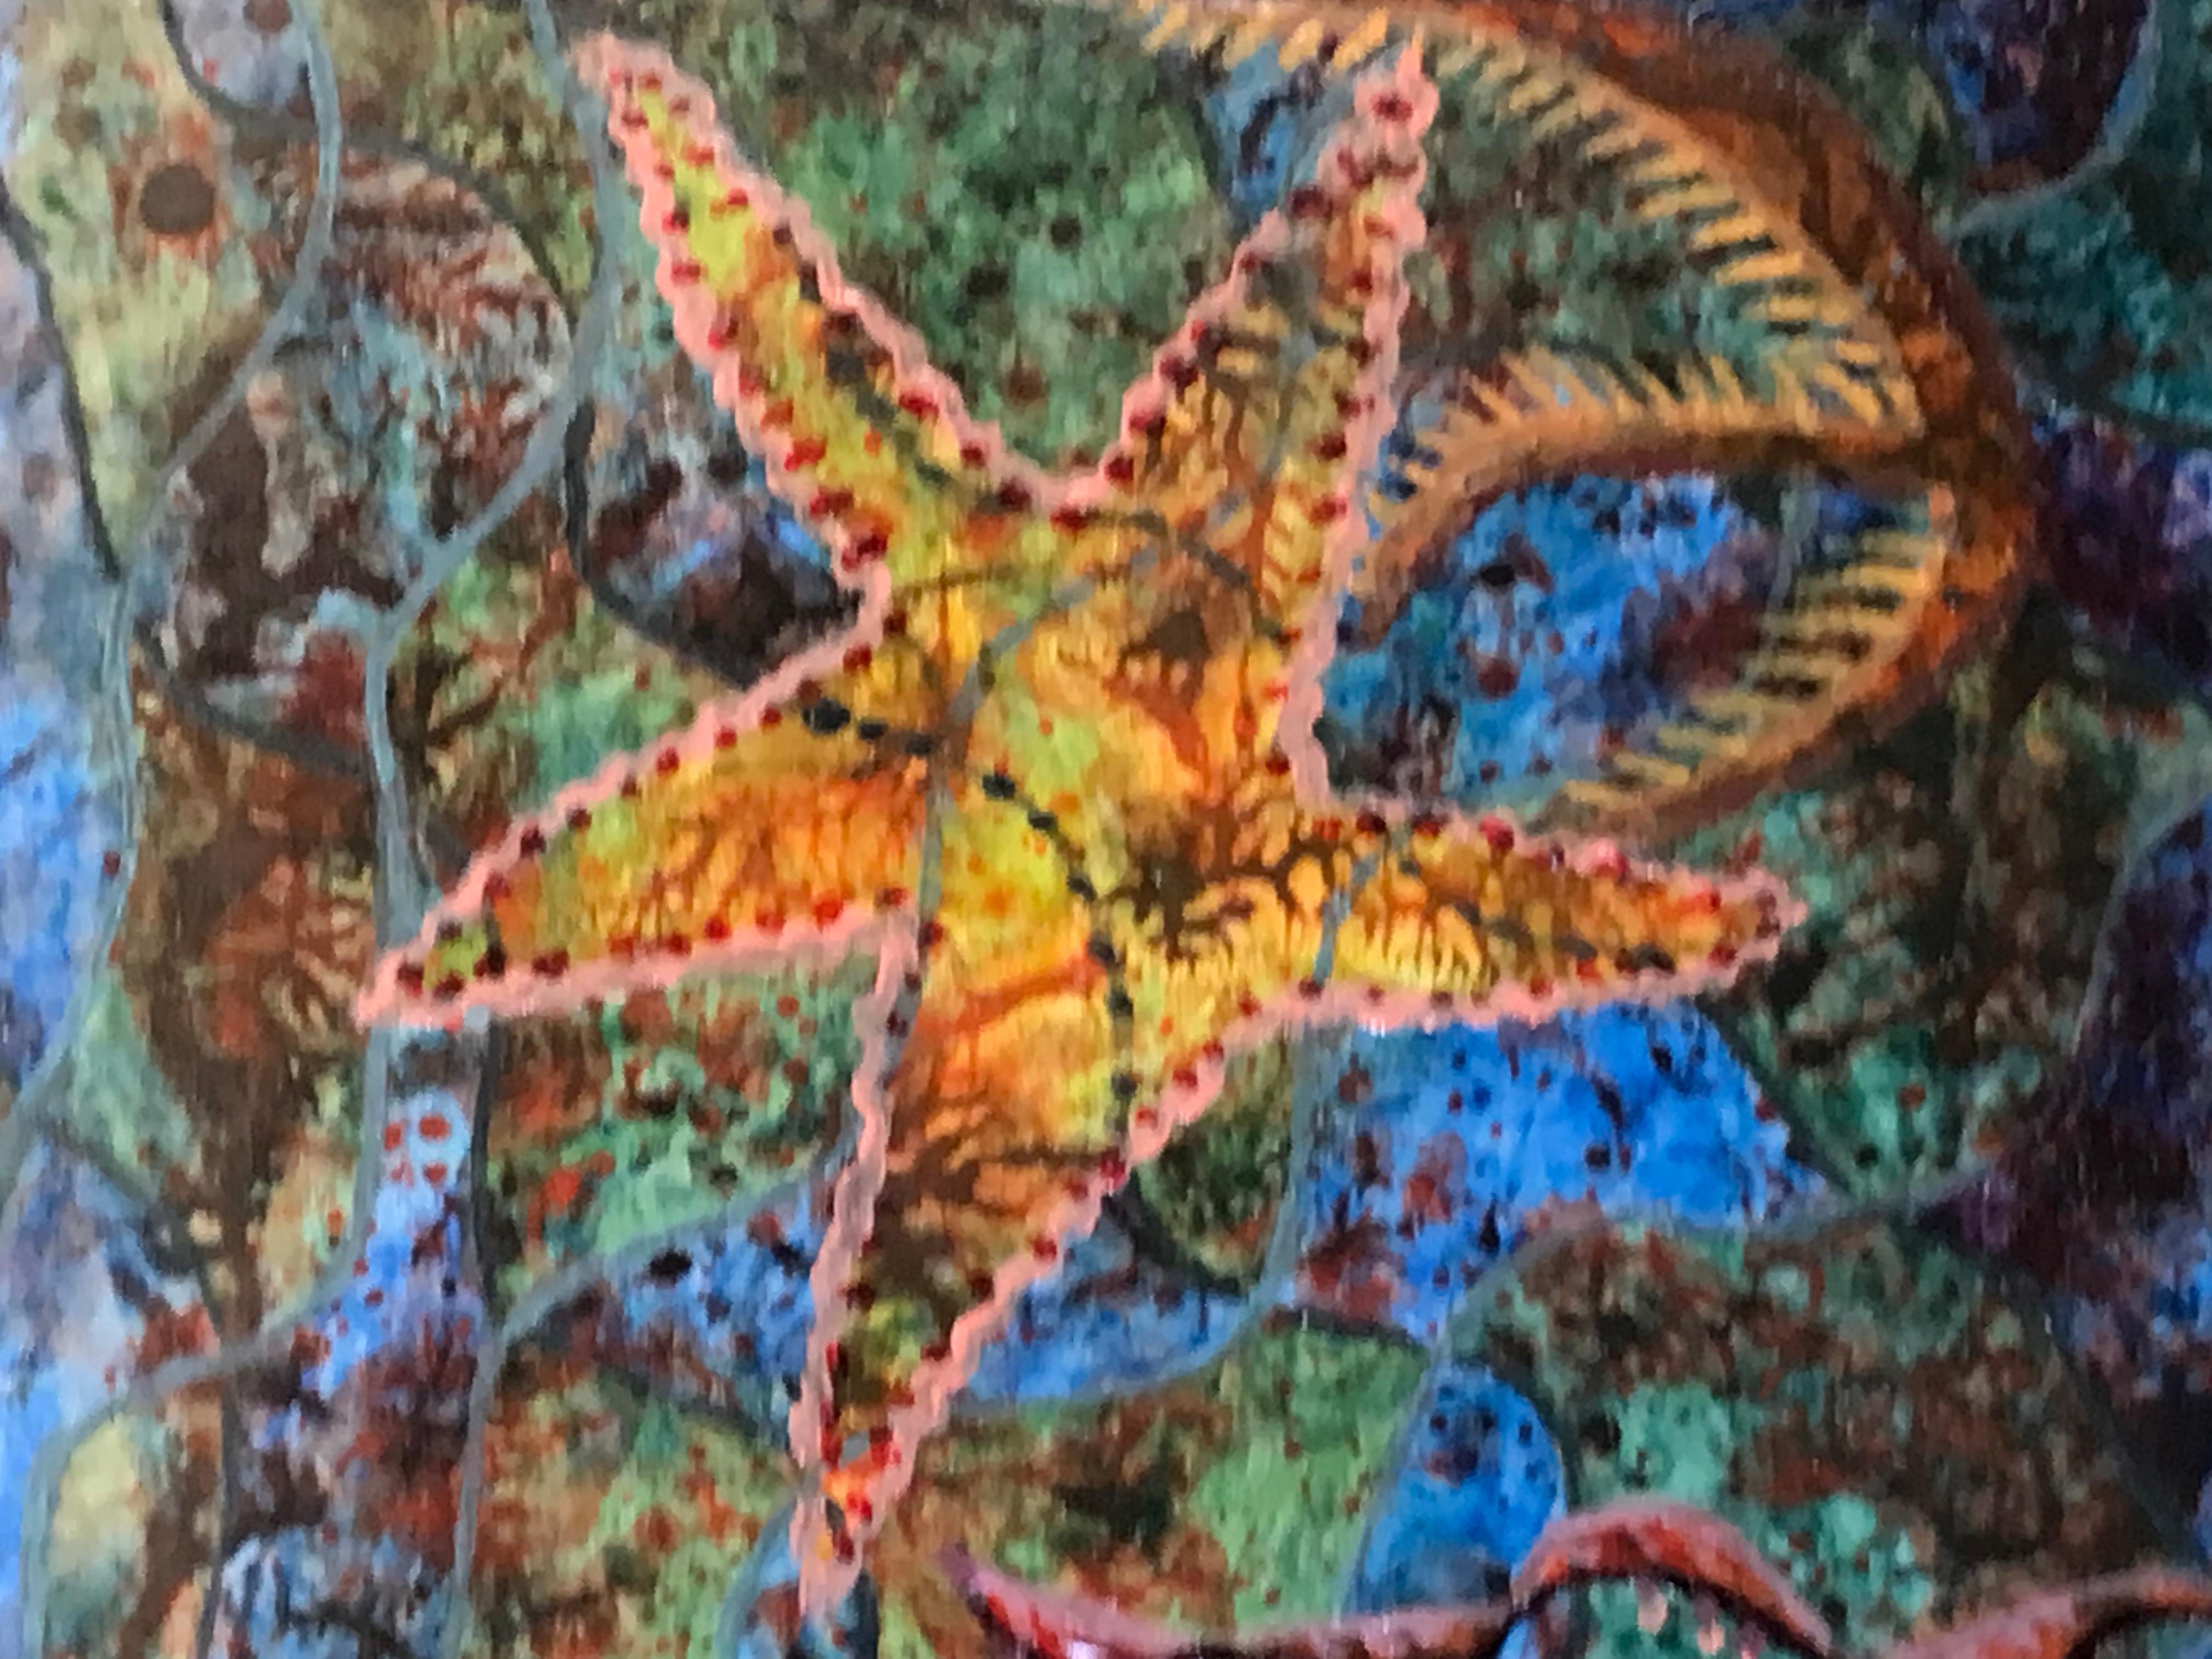 1960's British Surrealist Oil Painting -Colourful Under The Sea Abstract - Gray Abstract Painting by Elvic Steele